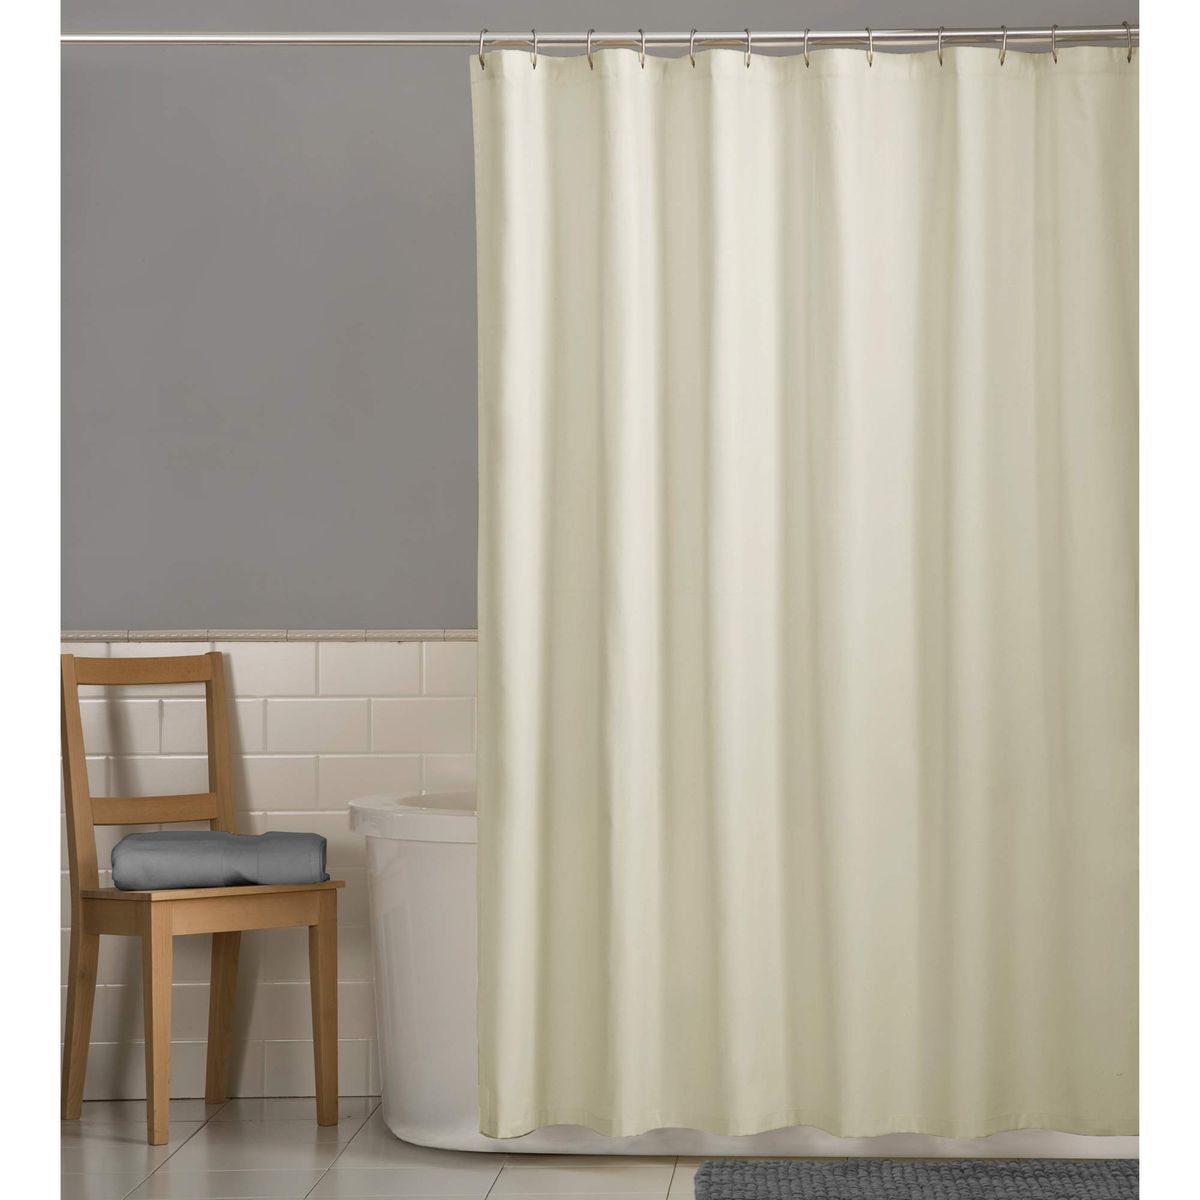 19 Best Shower Curtains 2021 The, What Kind Of Shower Curtain Does Not Need A Liner